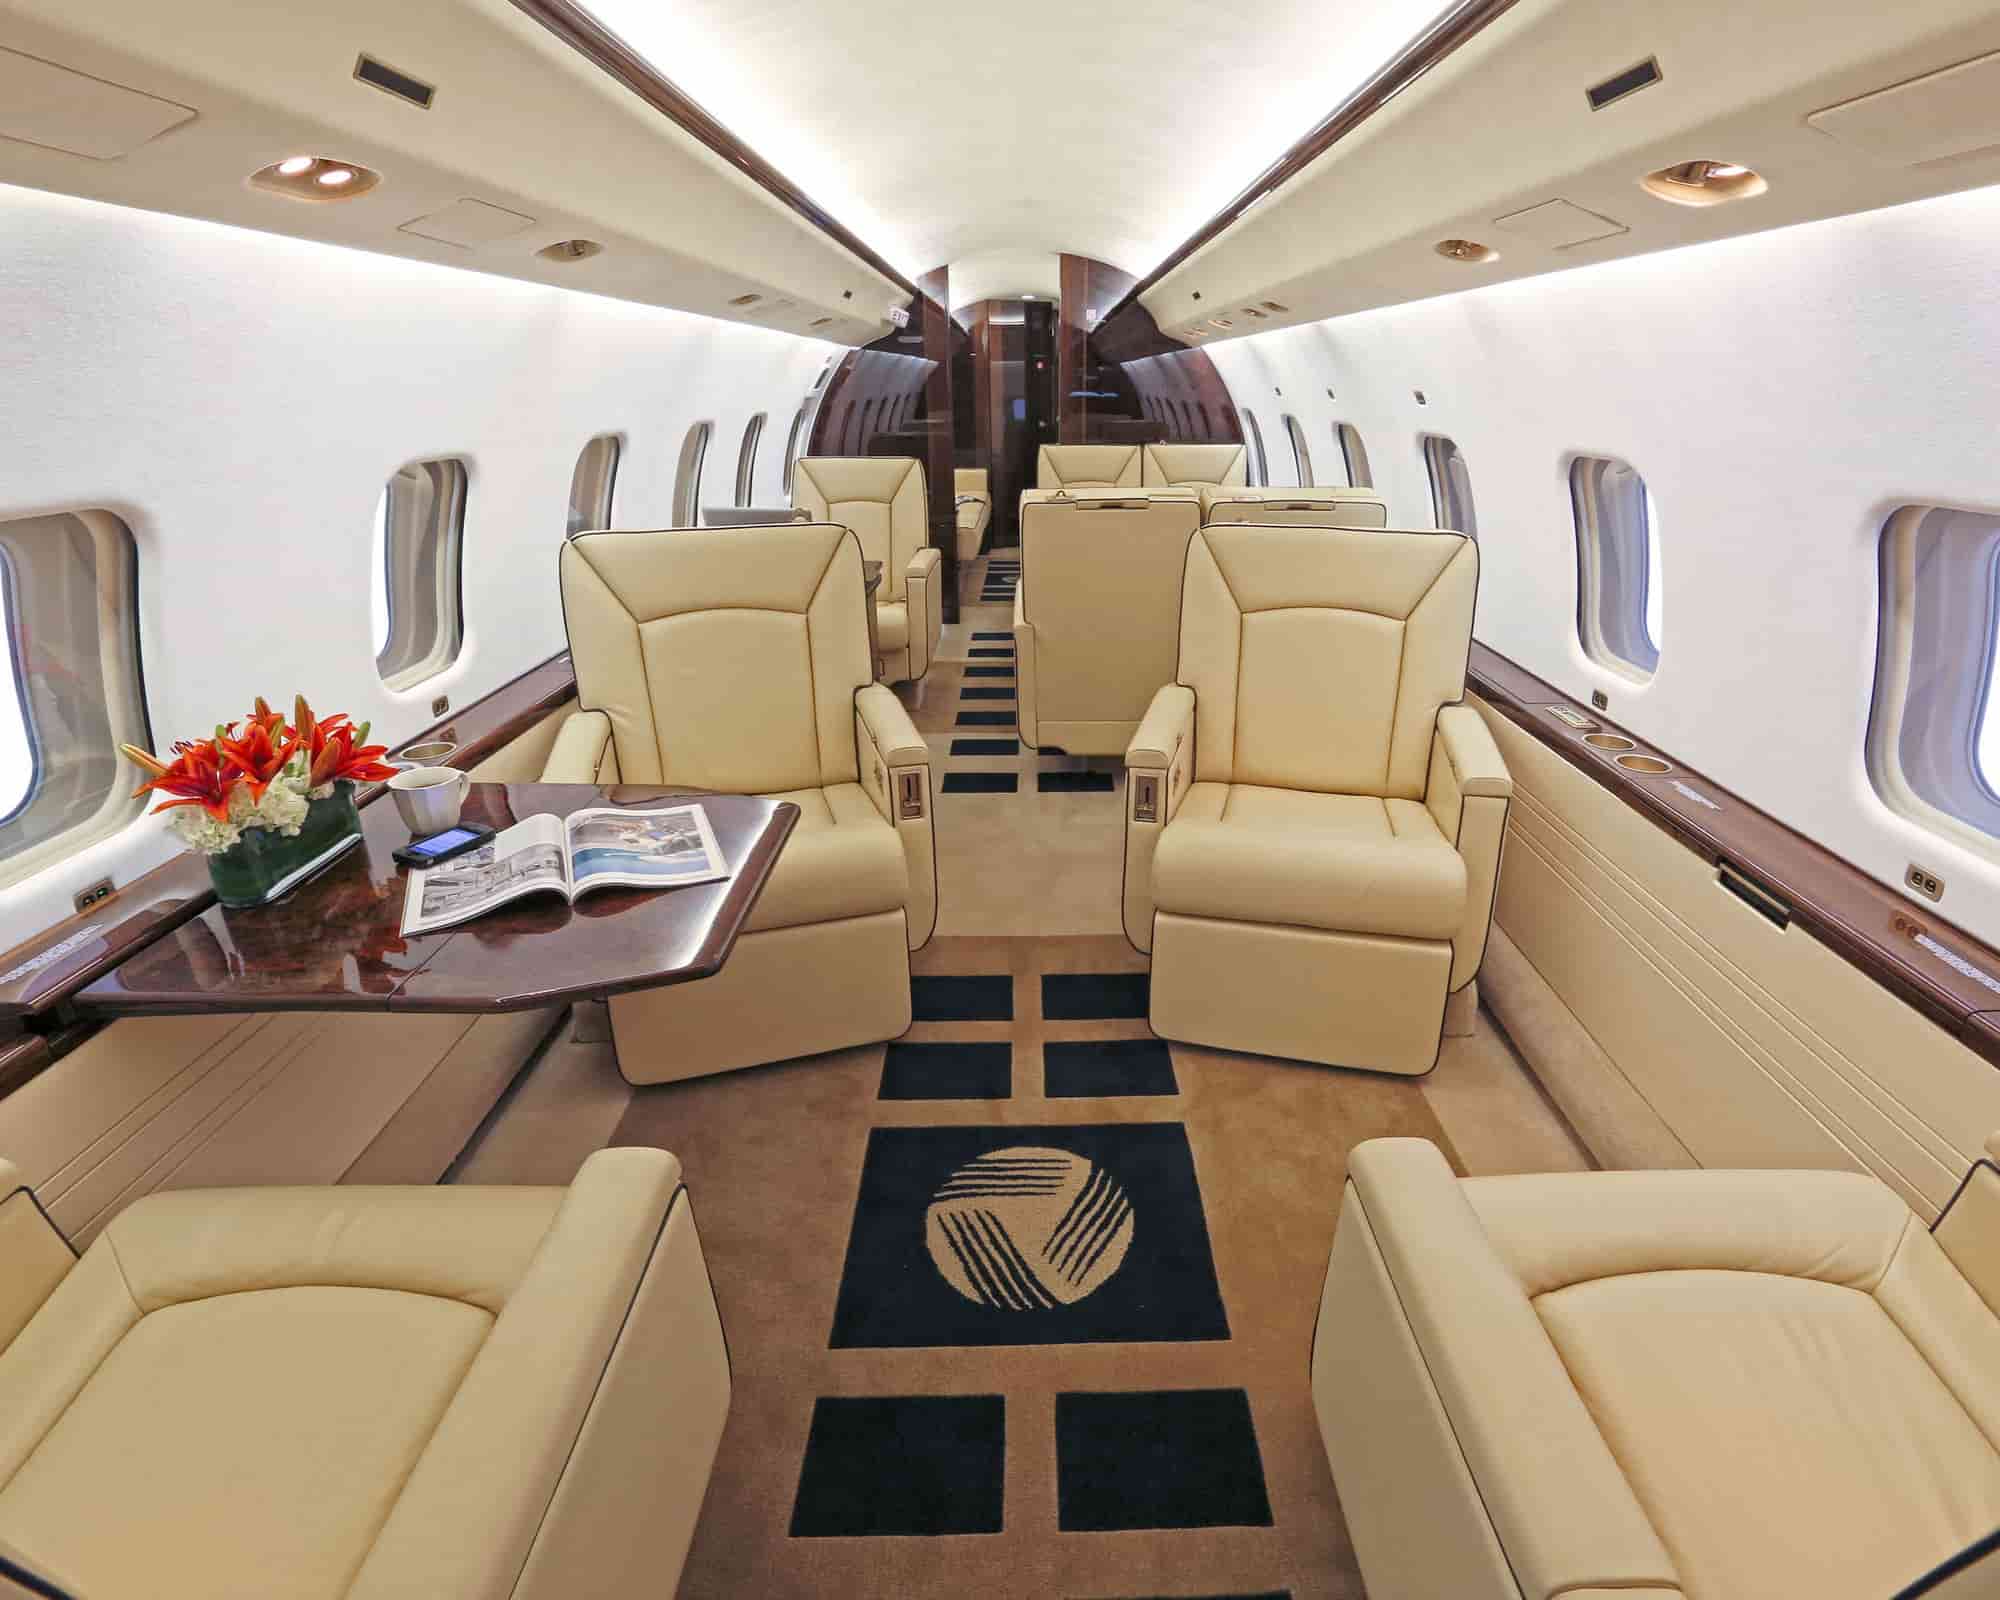 luxurious interior in the airplane with goldy color sofa and clean